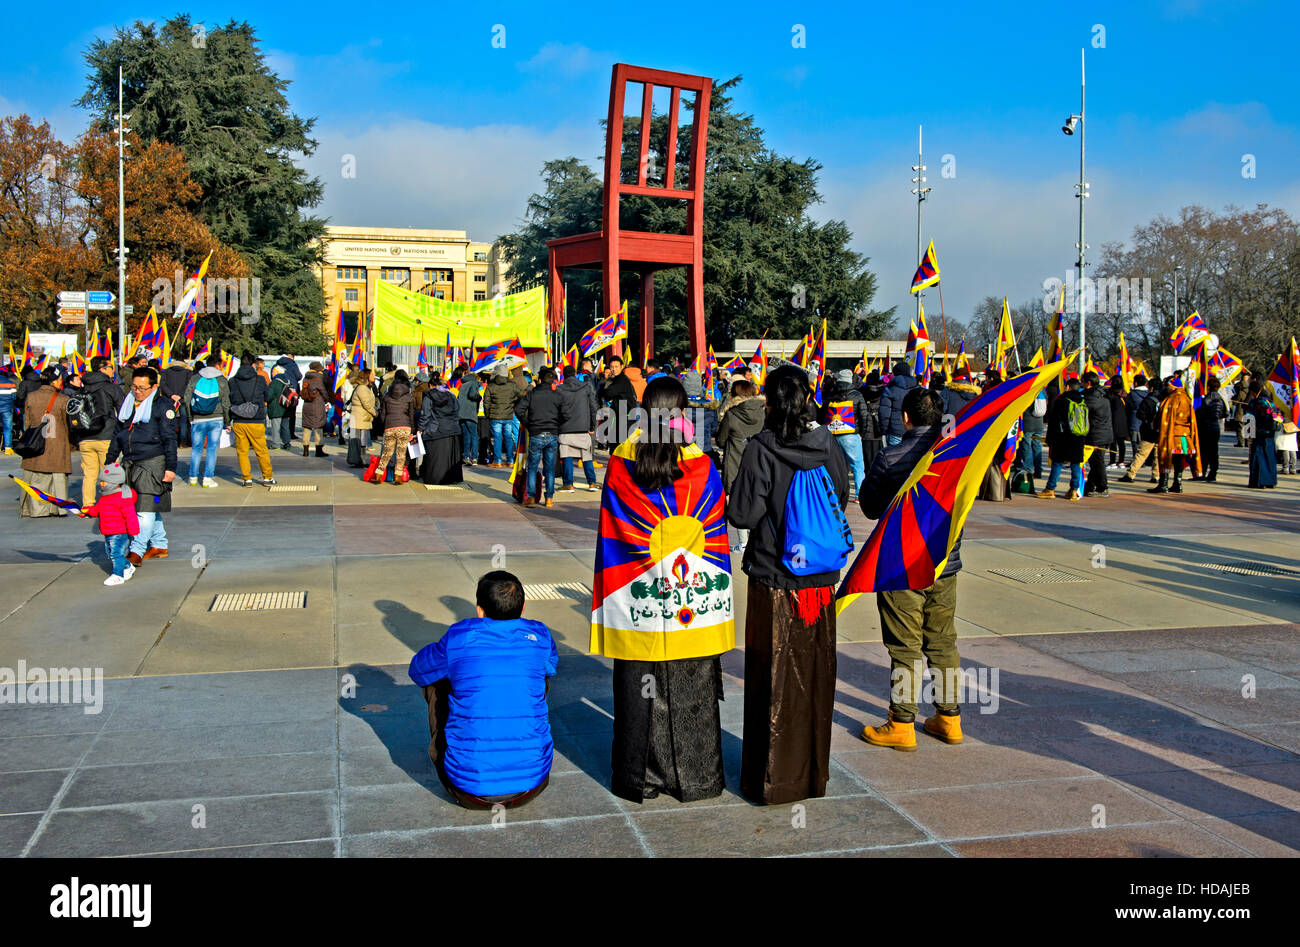 Geneva, Switzerland. 10 December 2016. On the occasion of the Human Rights Day 2016 and in commemoration of the 27th anniversary of the conferment of the Nobel Peace Prize to the Dalai Lama, members of the Tibetan Community in Switzerland and Liechtenstein gather on 10 December 2016 in Geneva, Switzerland, on the Place des Nations in front of the United Nations European headquarters for a protest rally against human rights violations in Tibet, Geneva, Switzerland. Credit: GFC Collection/Alamy Live News Stock Photo